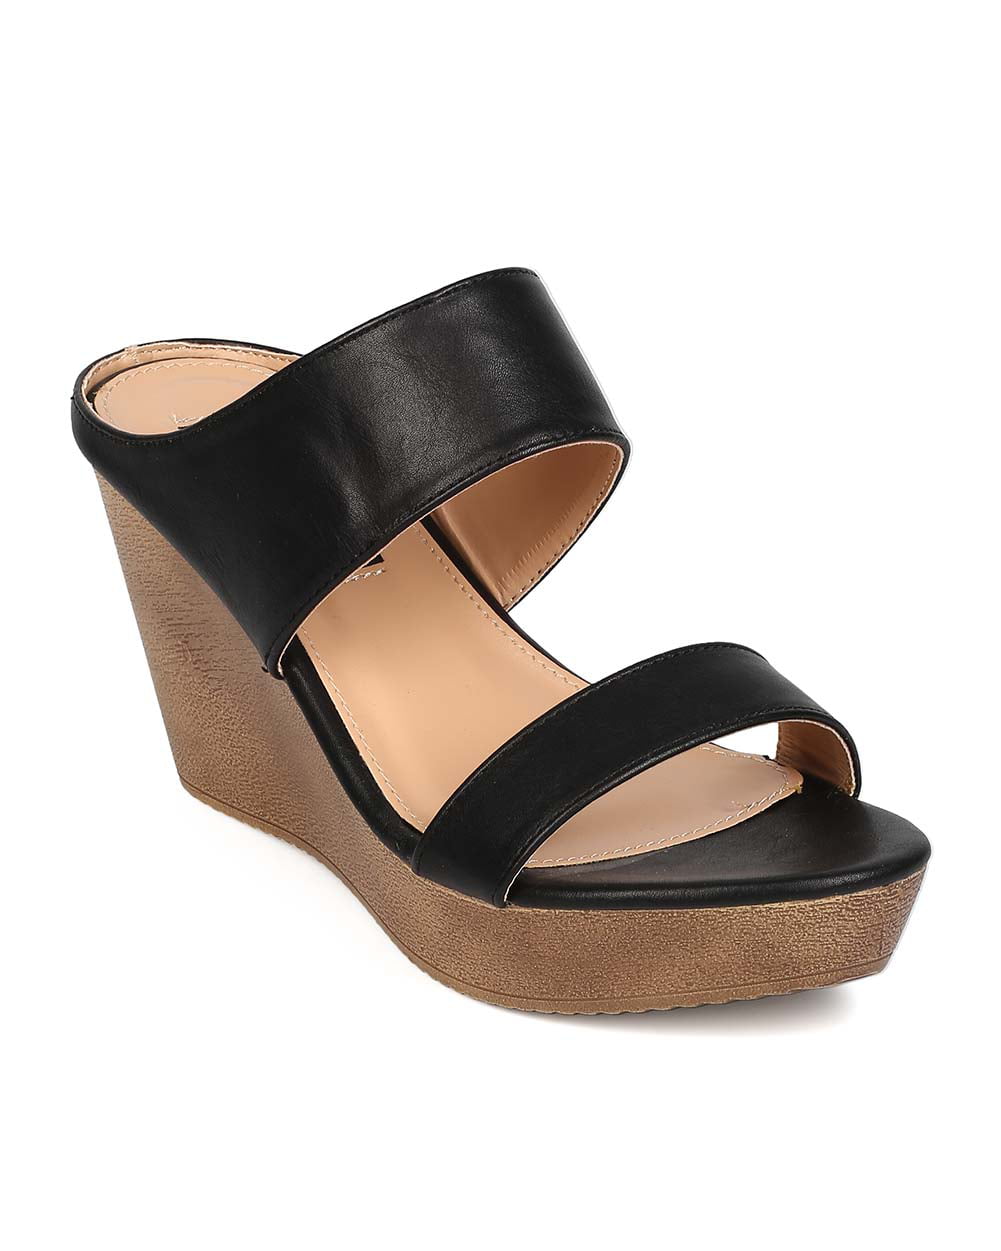 slip on double band wedge sandals